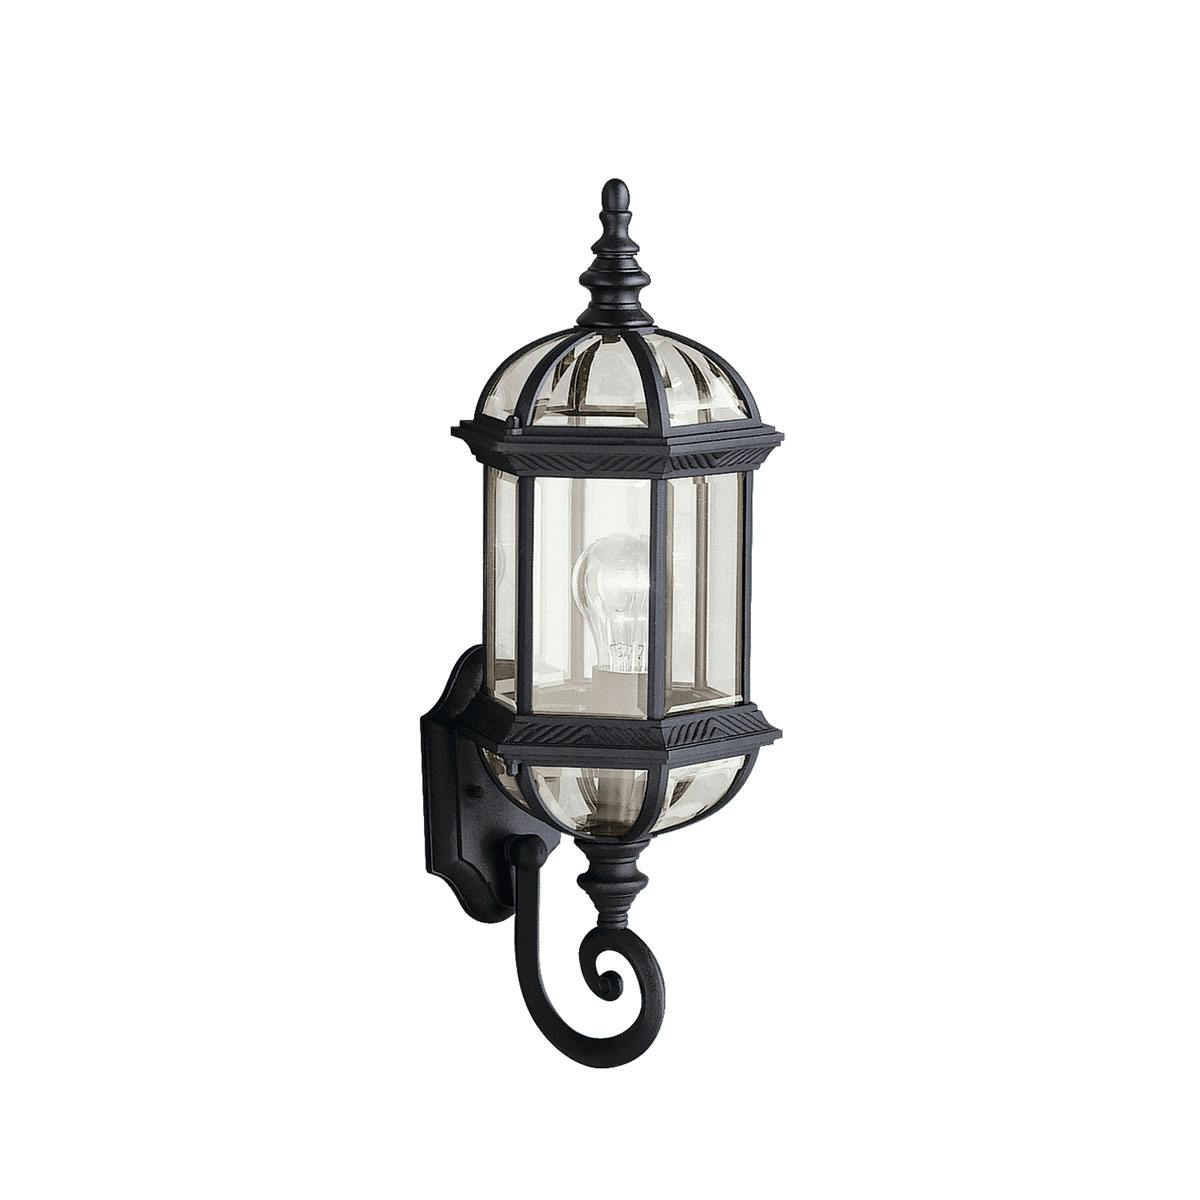 Barrie 21.75" Outdoor Wall Light Black on a white background